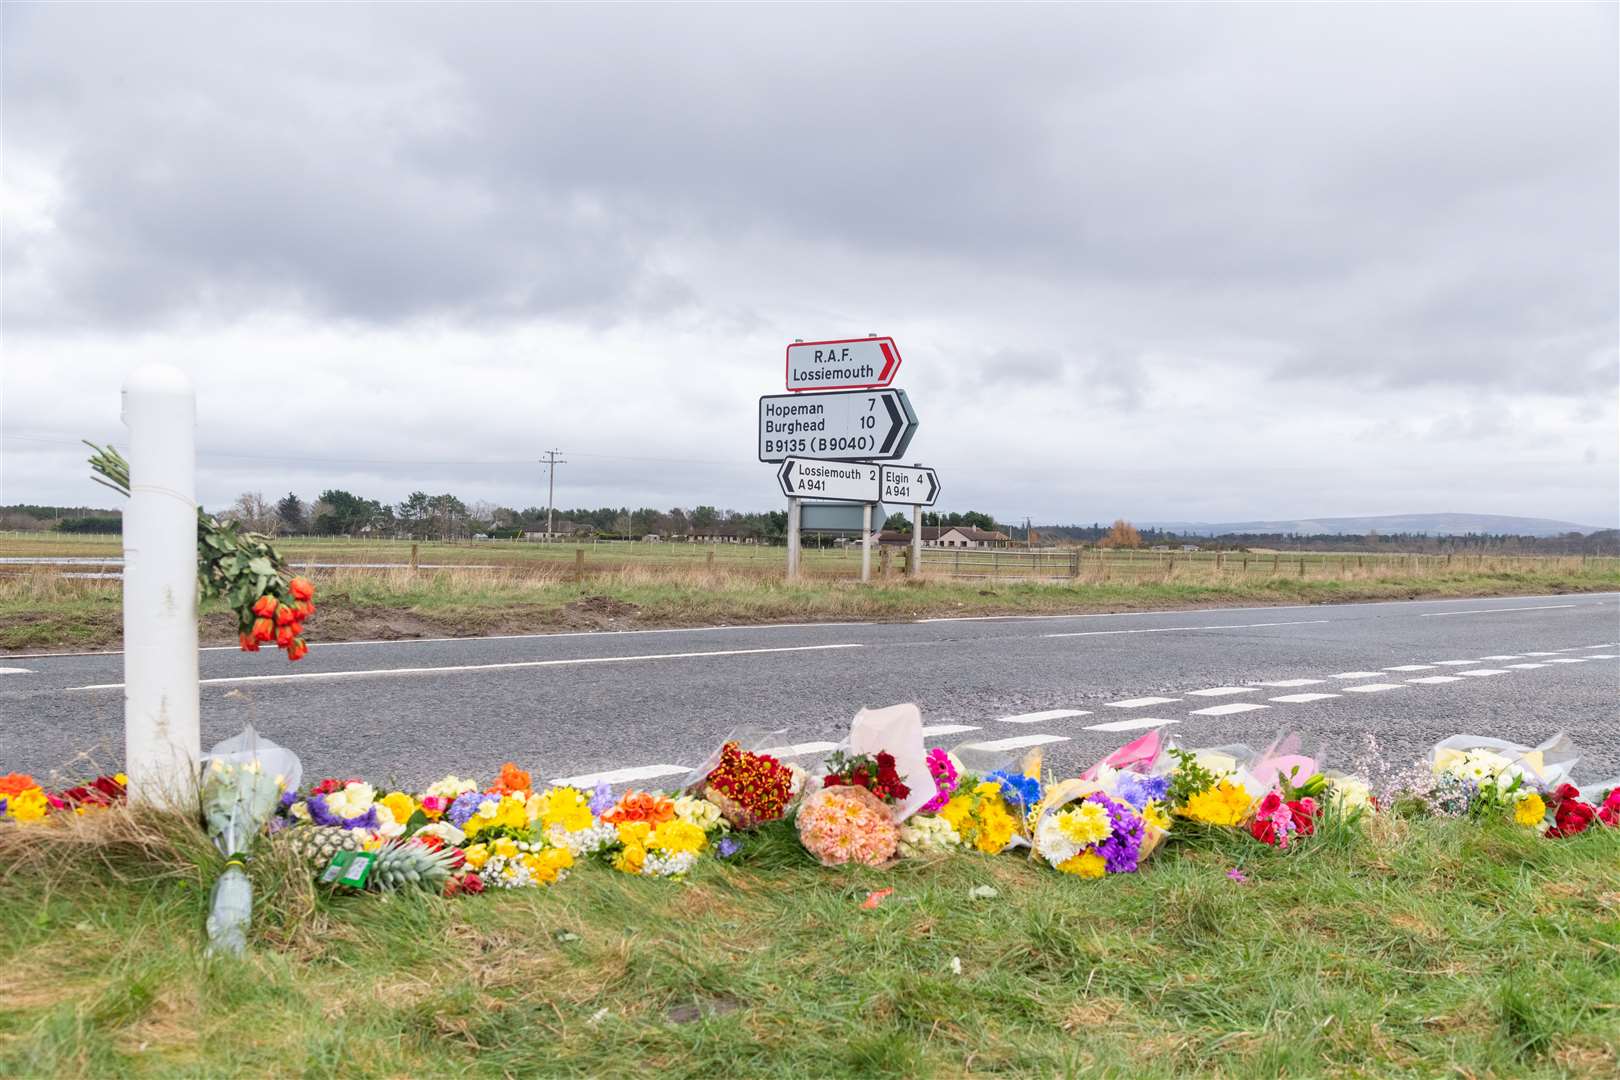 Tributes to Marcus and Gregor have been left at the side of the road. Picture: Beth Taylor